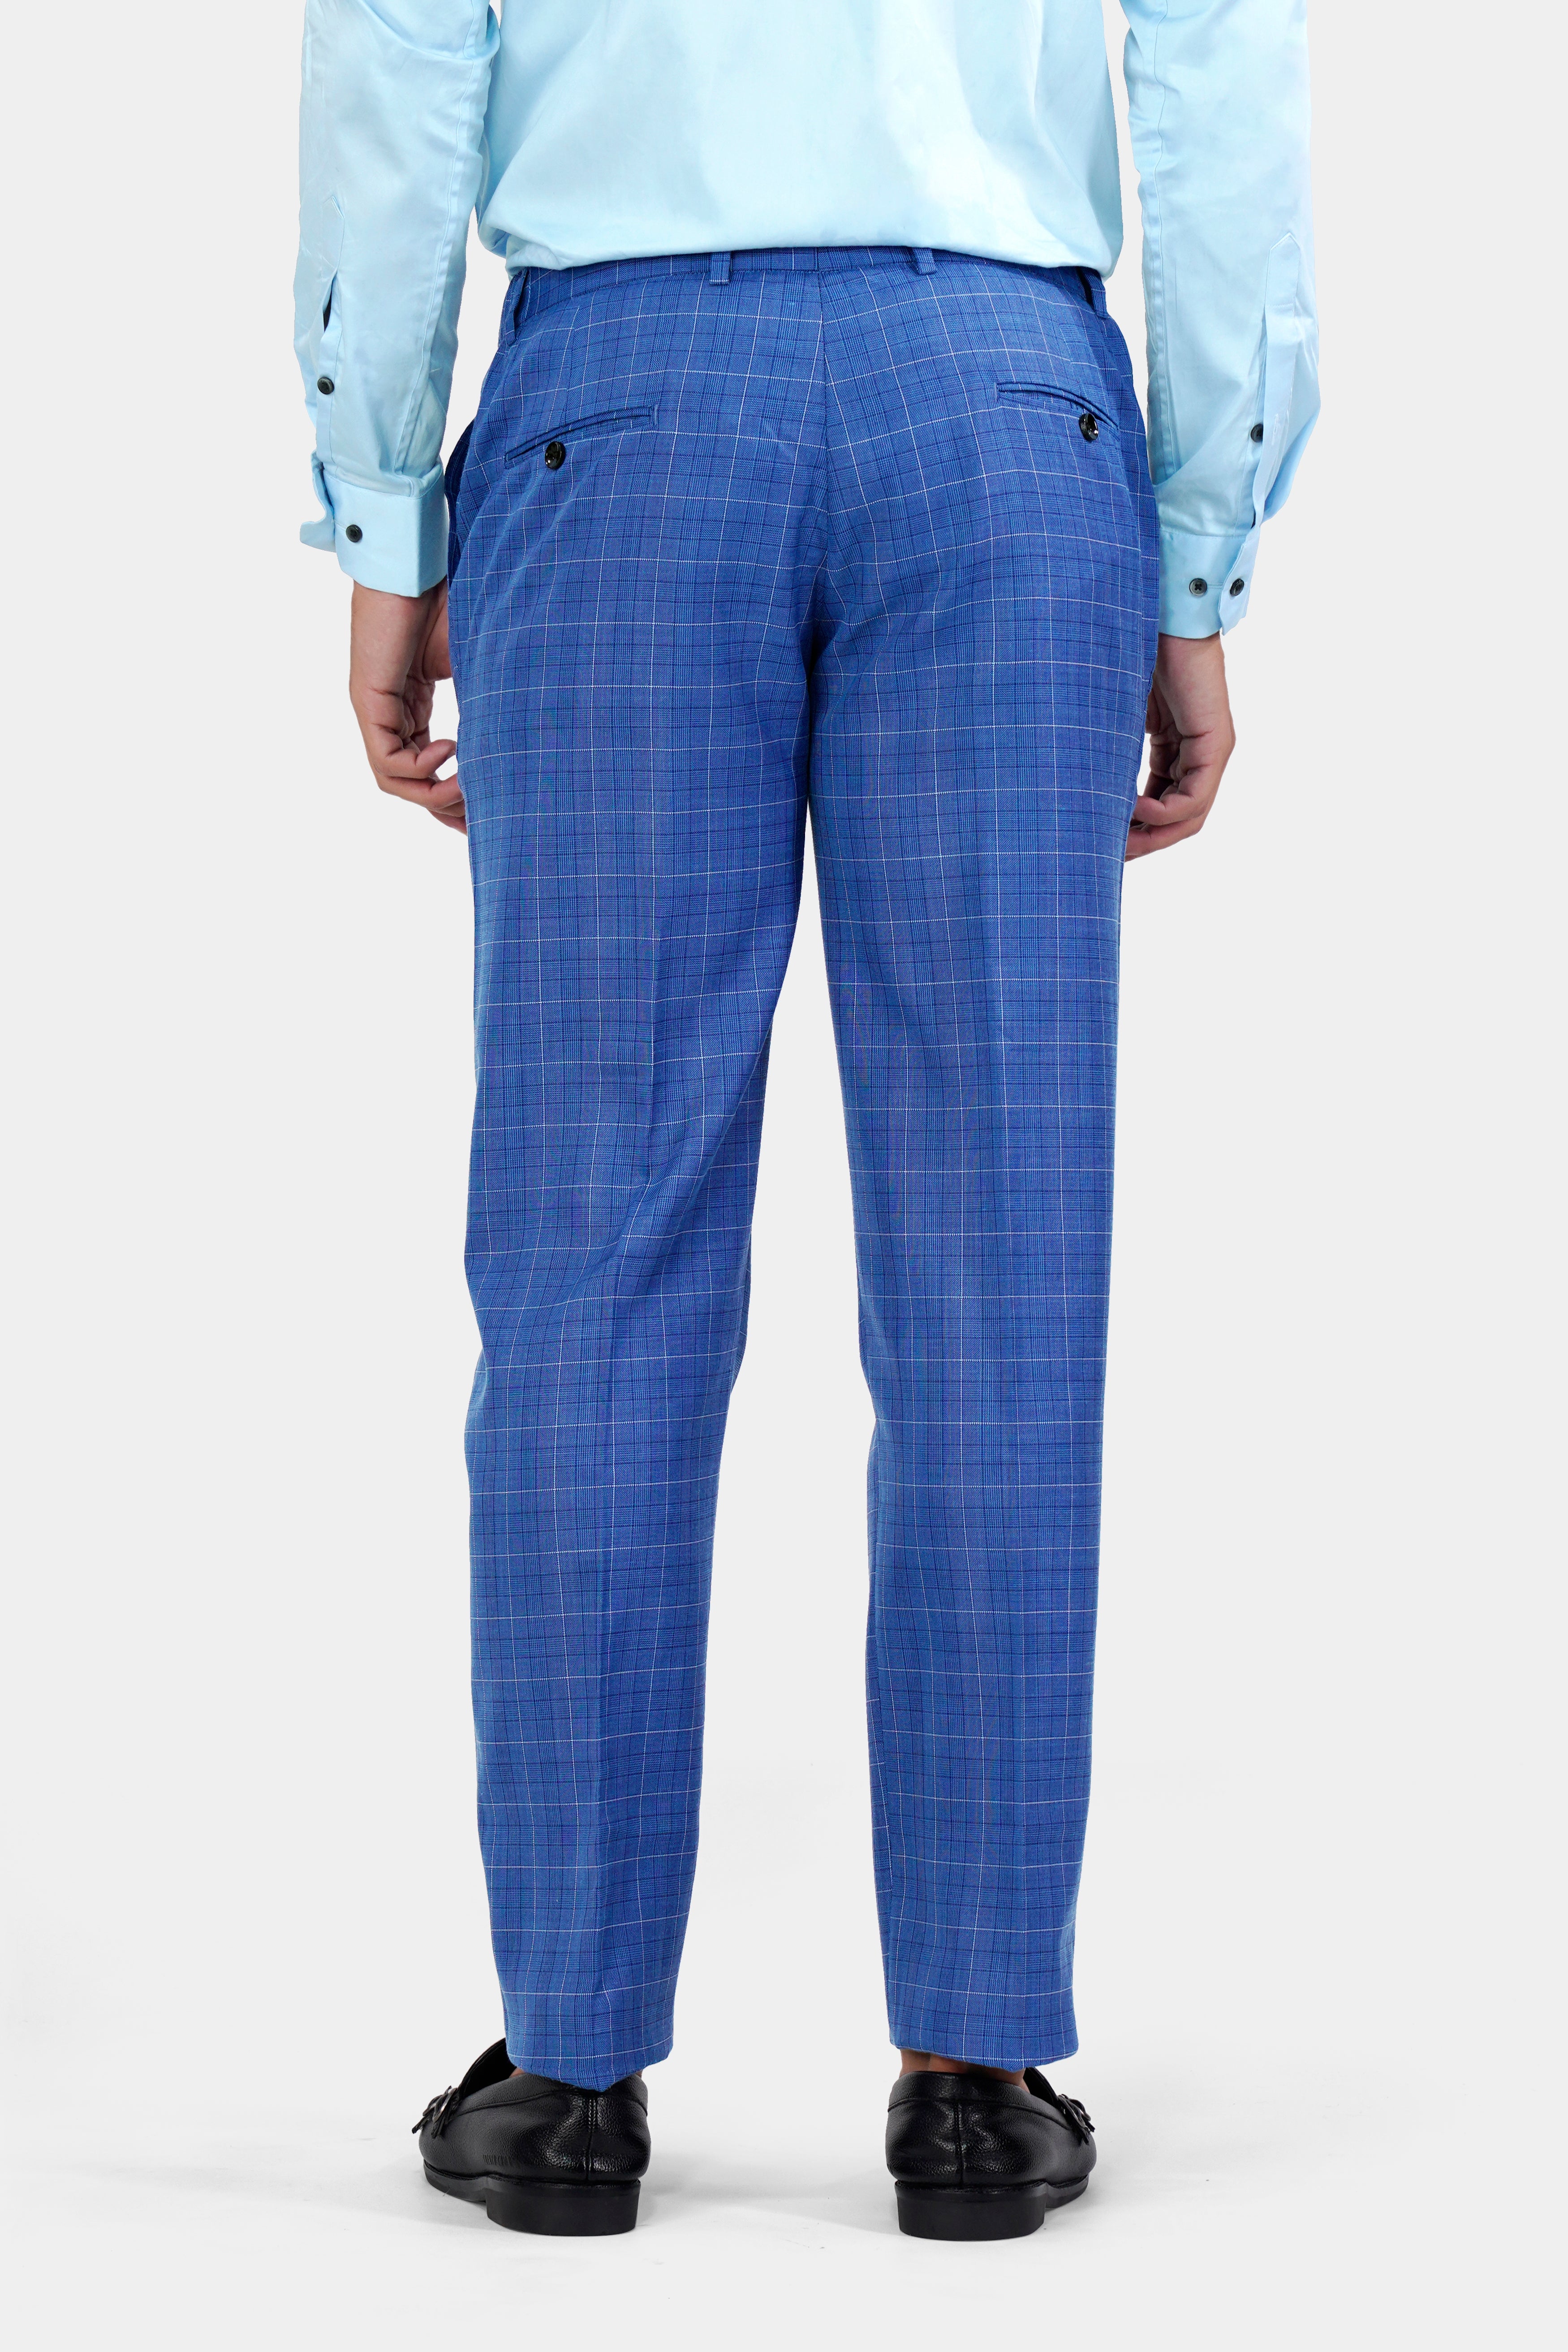 Blue Plaid Pants Outfits For Men (188 ideas & outfits) | Lookastic